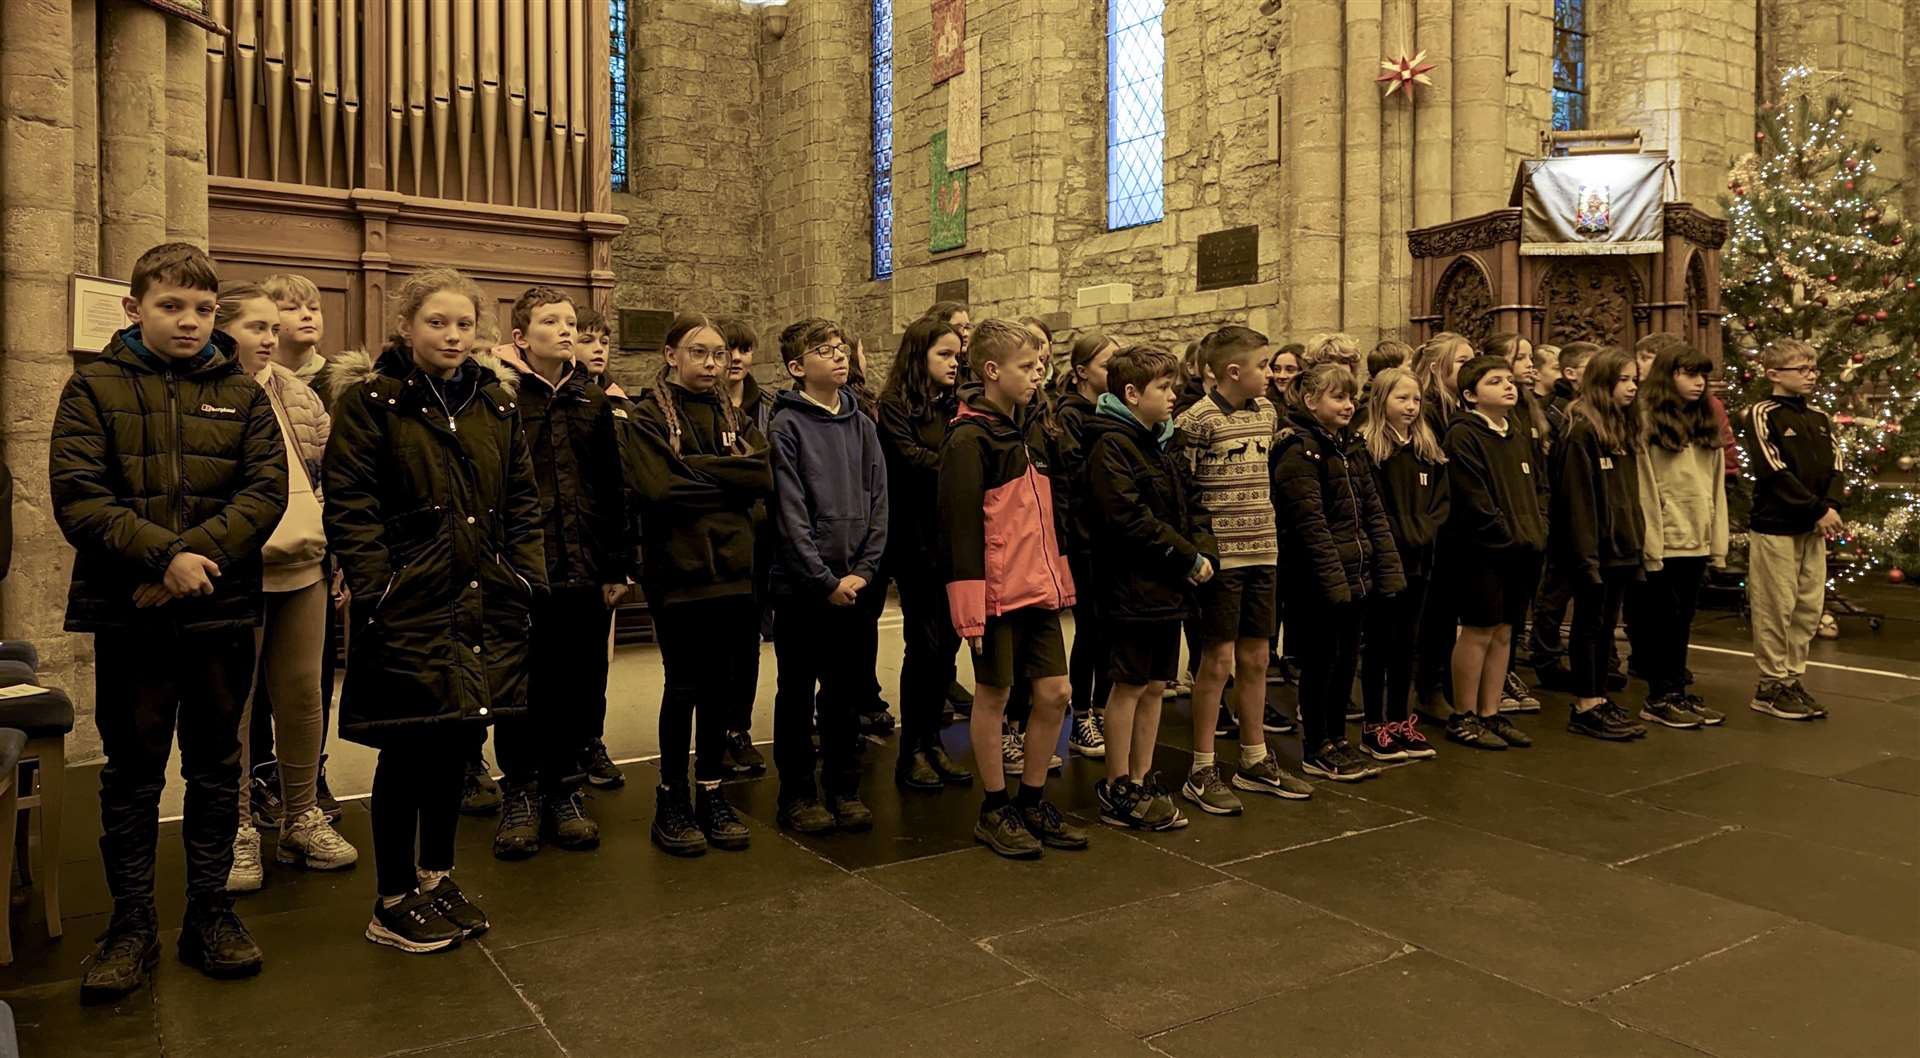 Dornoch P6s and P7s gave a rendition of Feliz Navidad before the P7s read the story of Christmas.